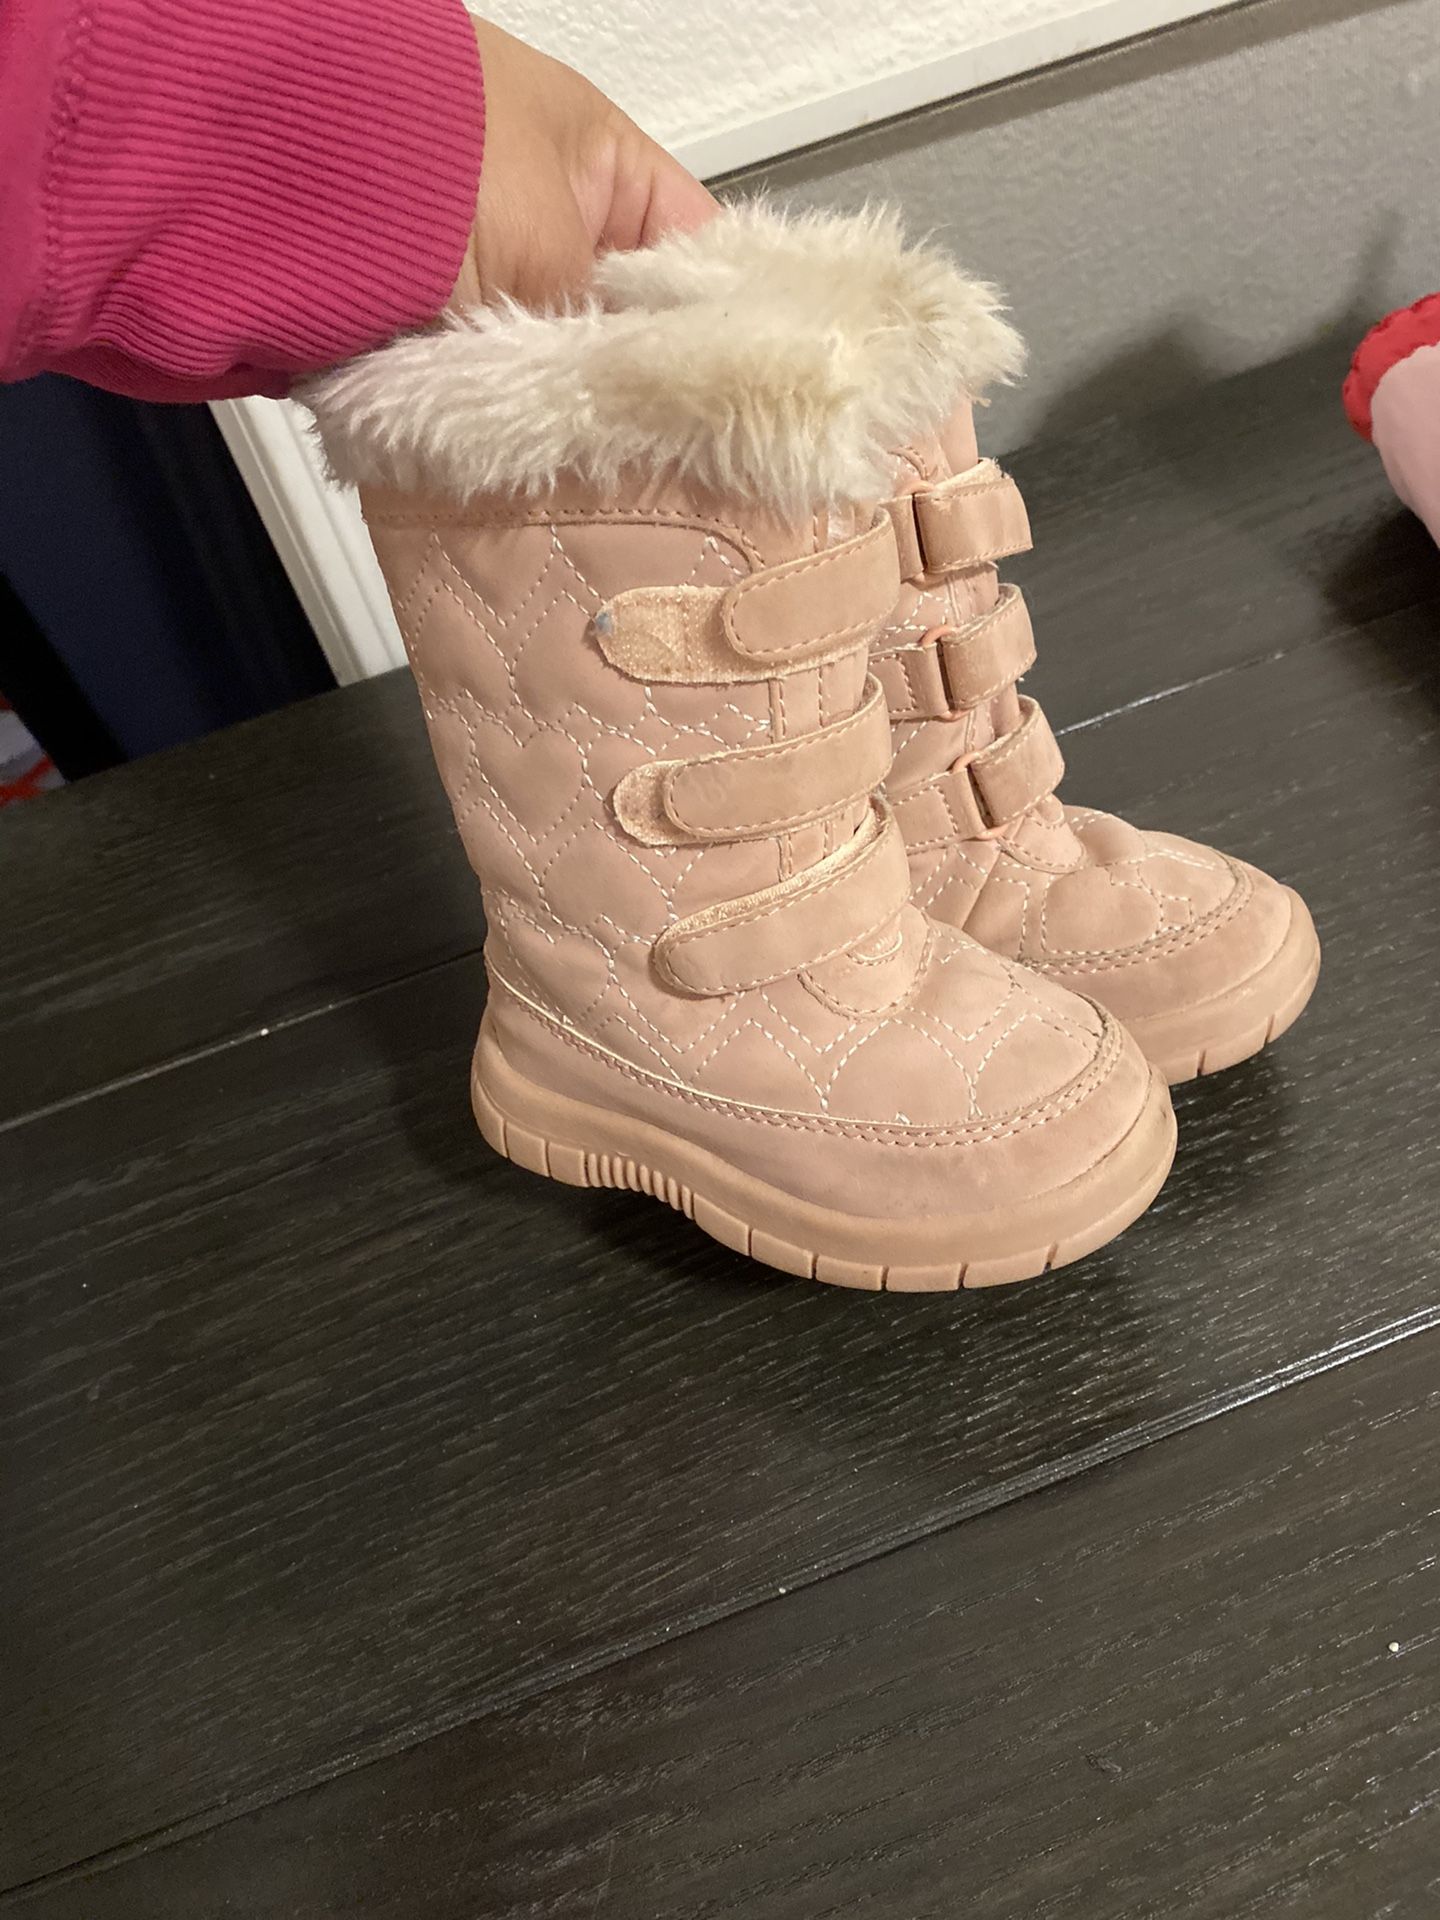 Snow boots girl